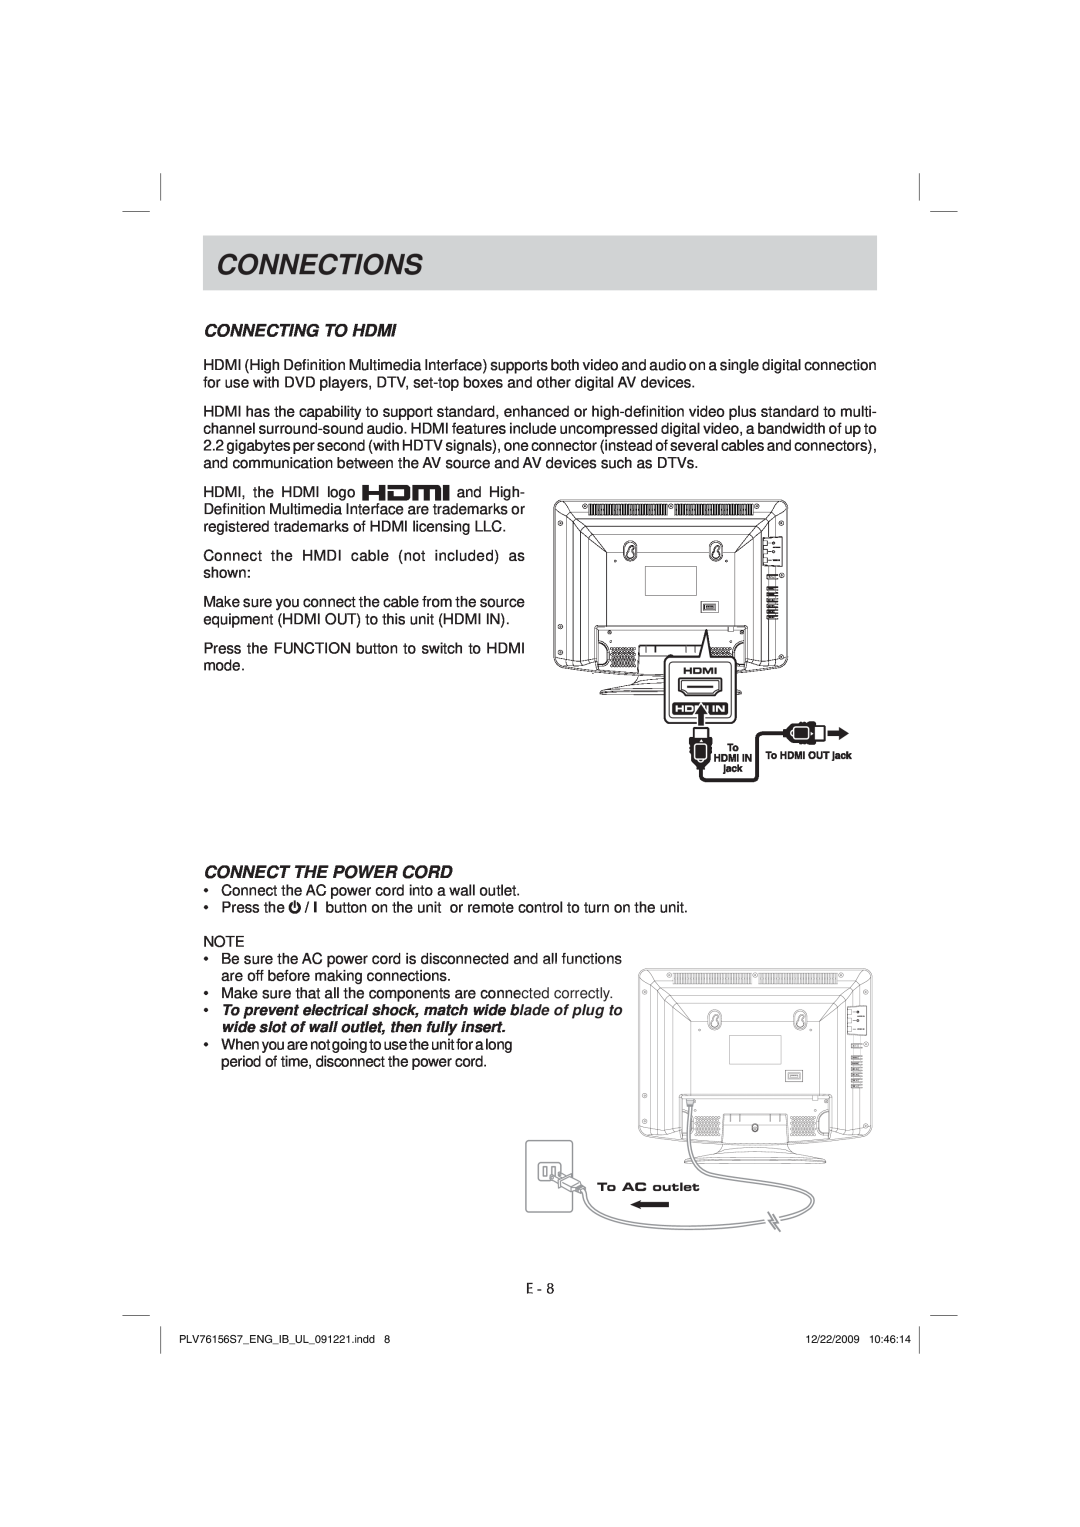 Venturer PLV7615H instruction manual Connecting To Hdmi, Connect The Power Cord, Connections, To AC outlet 